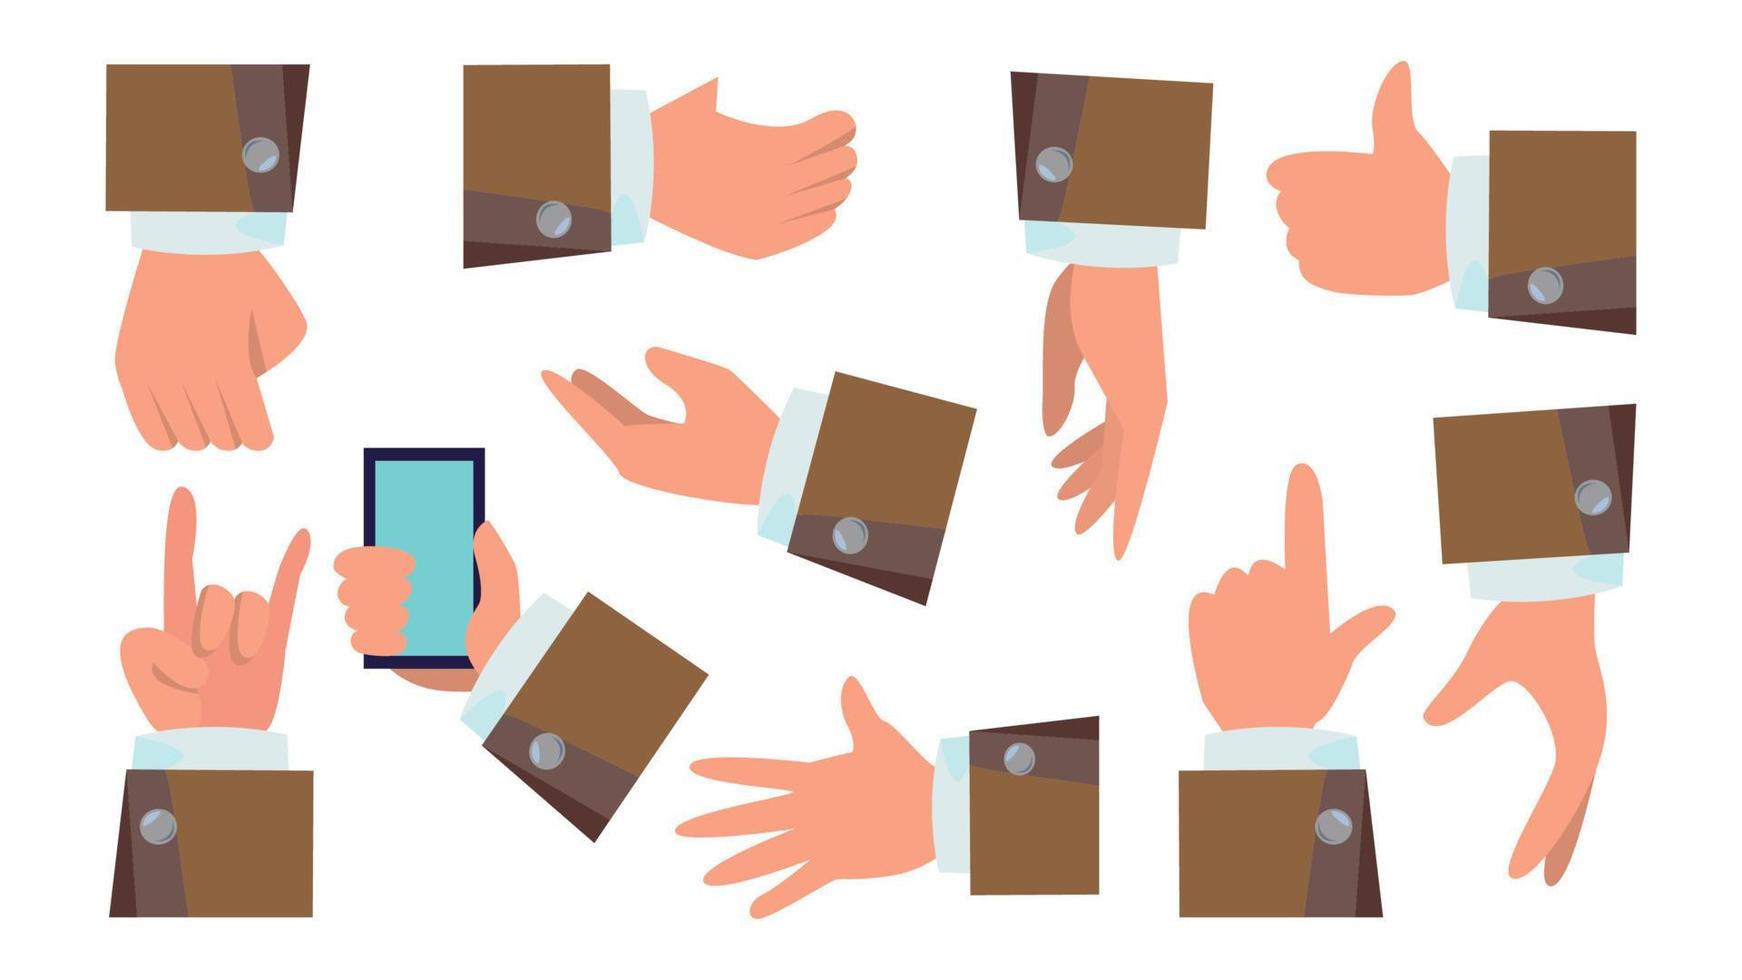 Hands Gestures Set Vector. Businessman Hands. Different Action Poses. Flat Cartoon Isolated Illustration vector